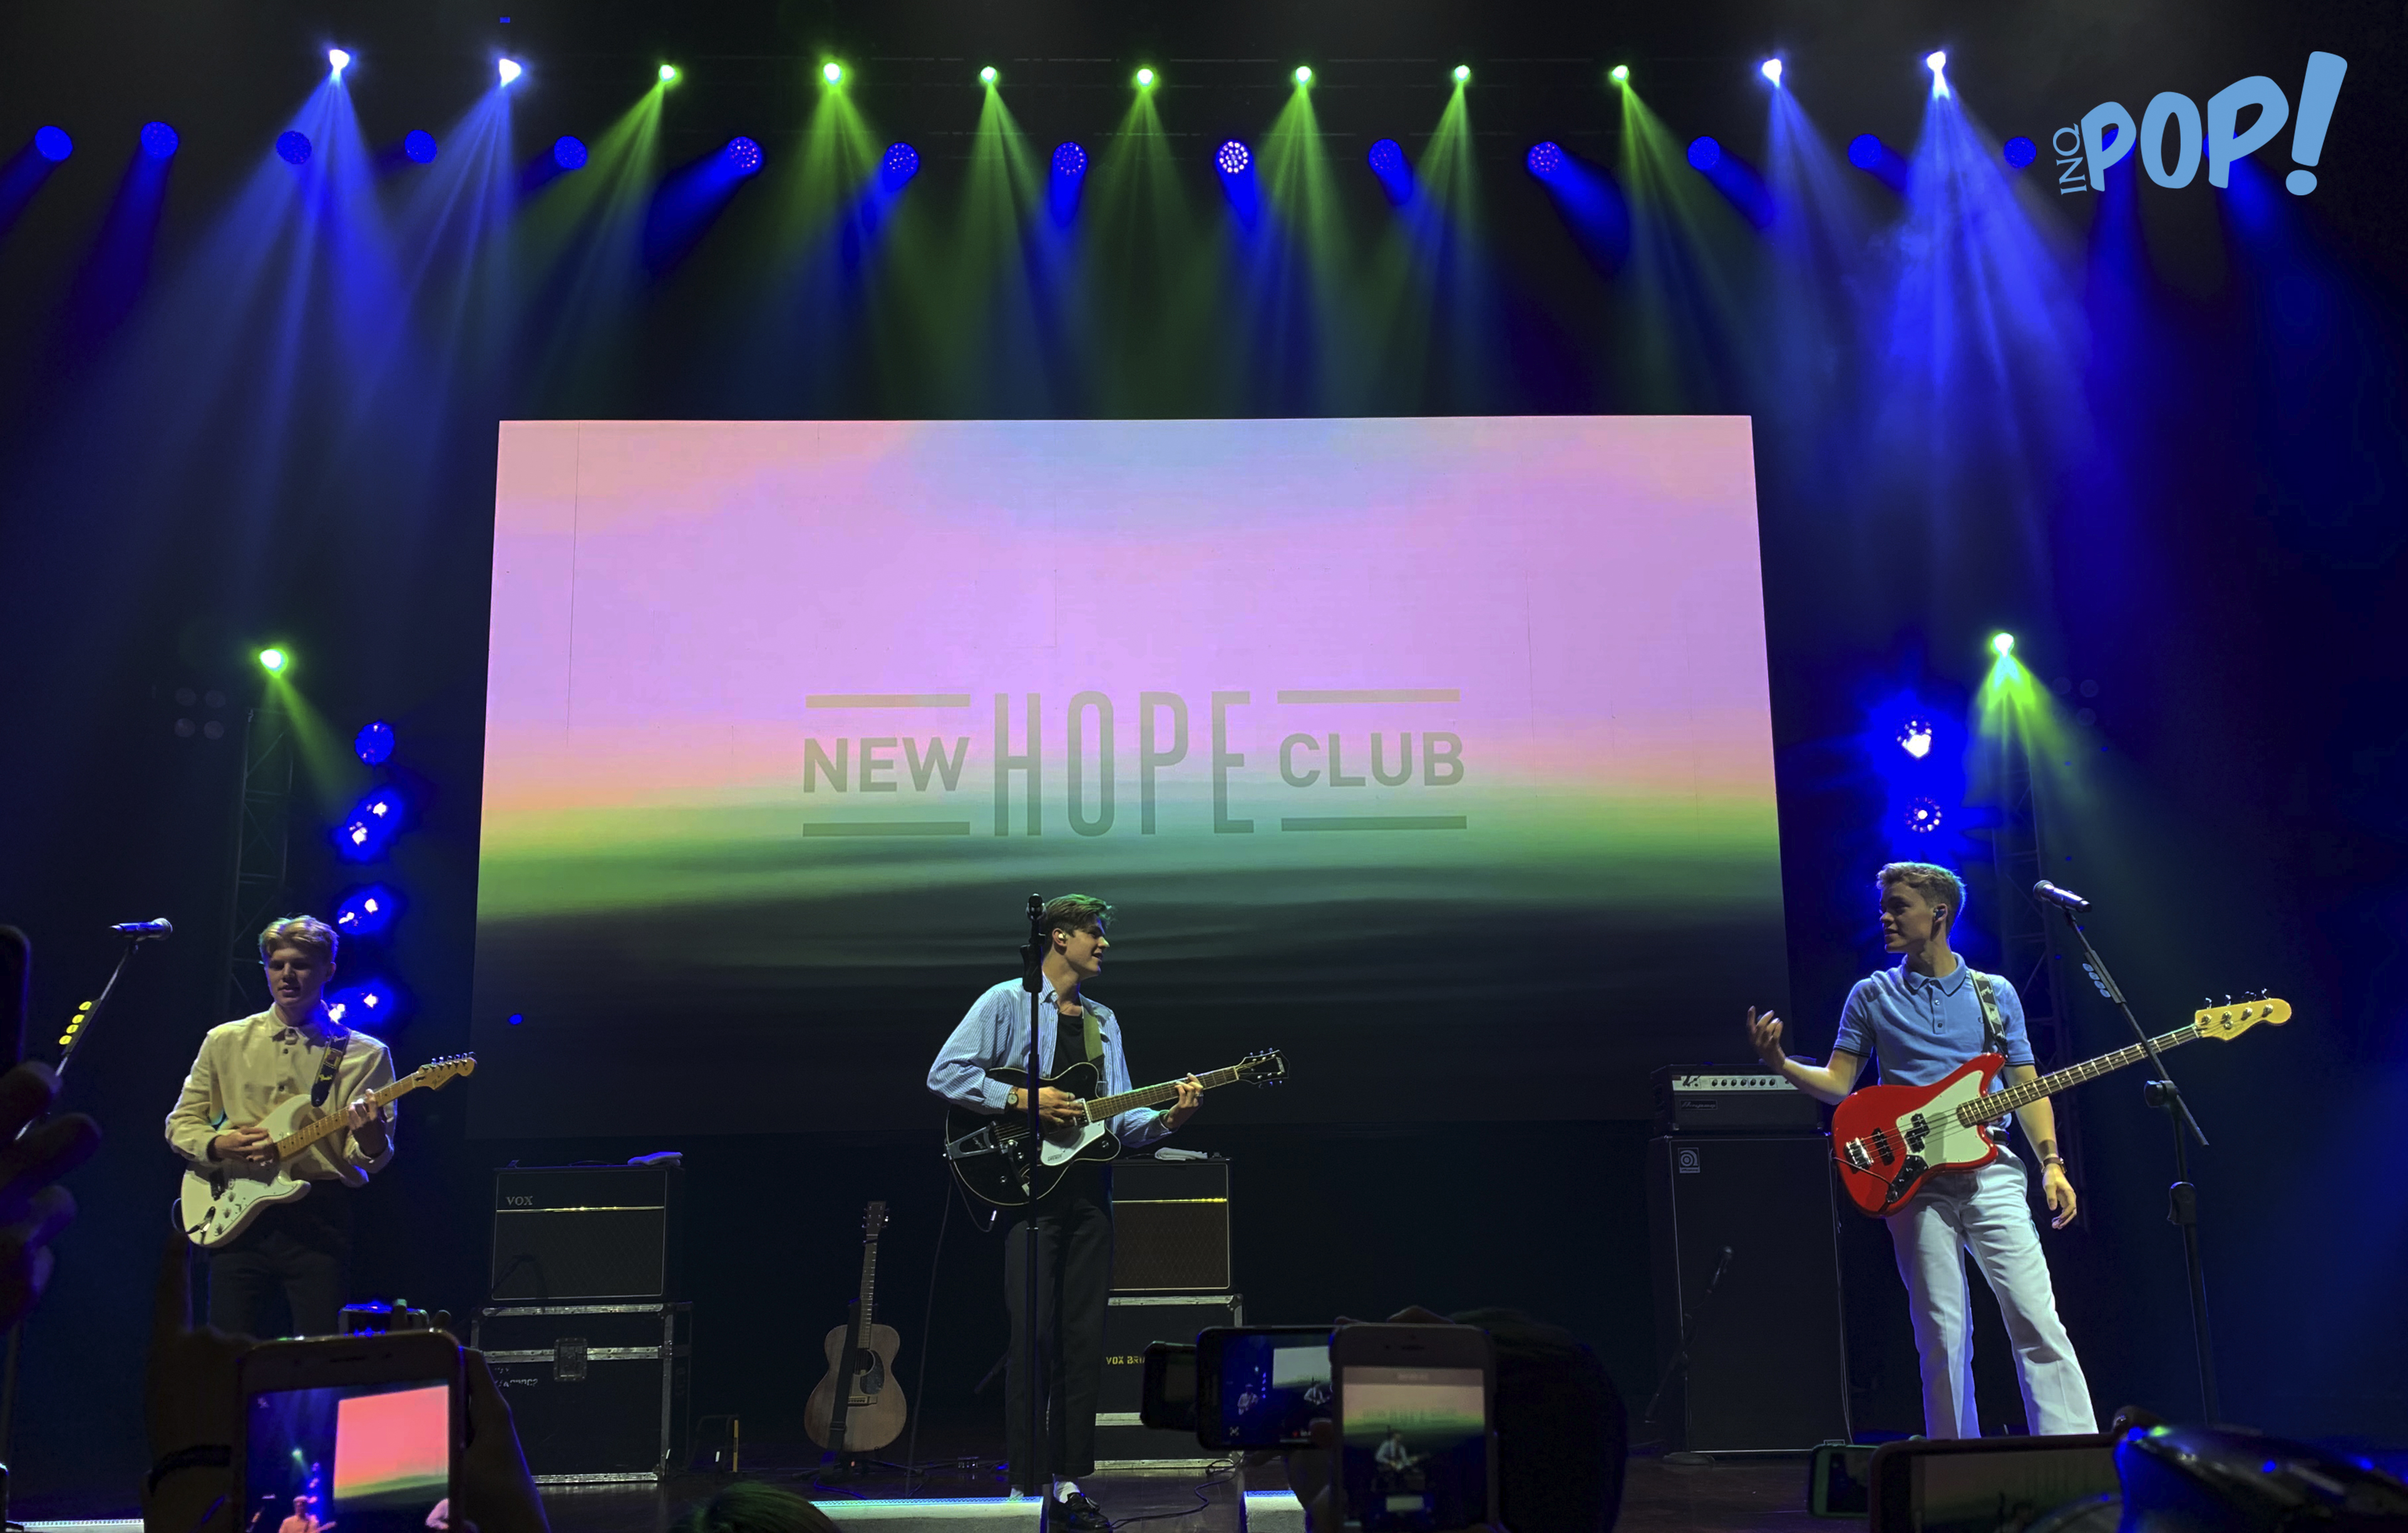 IN PHOTOS: Fans fell in ‘Love Again’ with New Hope Club during their Manila concert